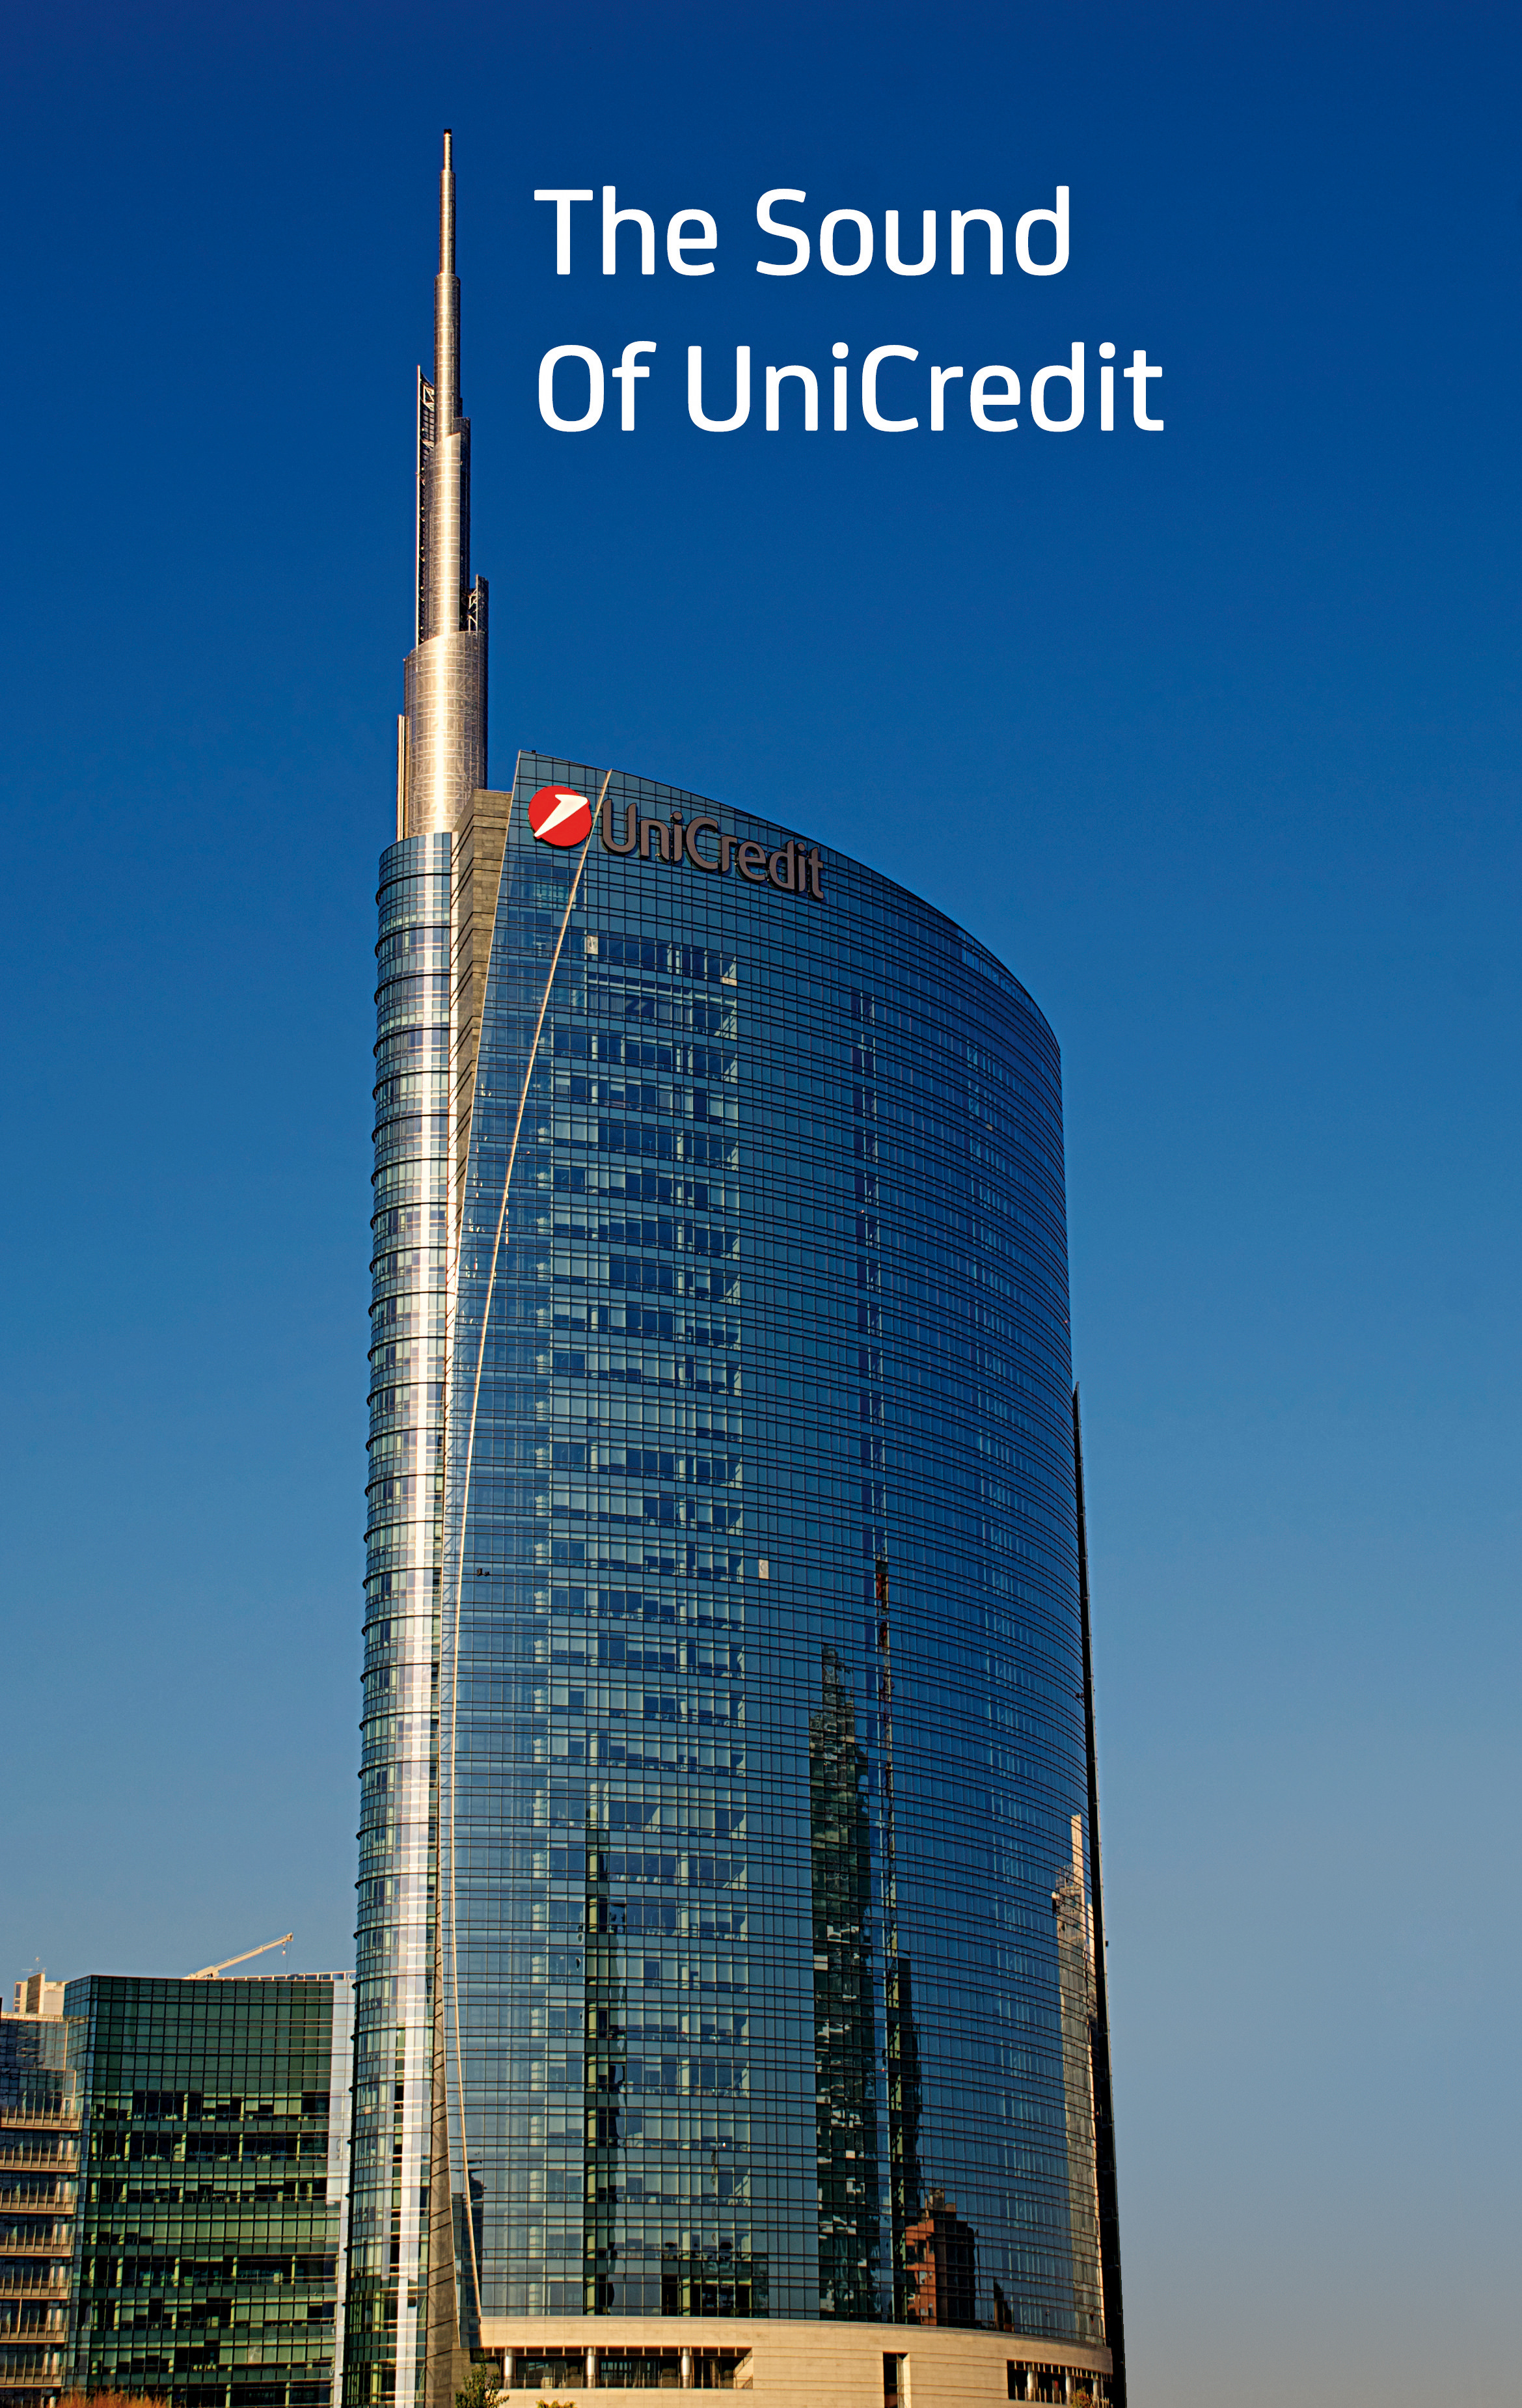 The Sound of UniCredit